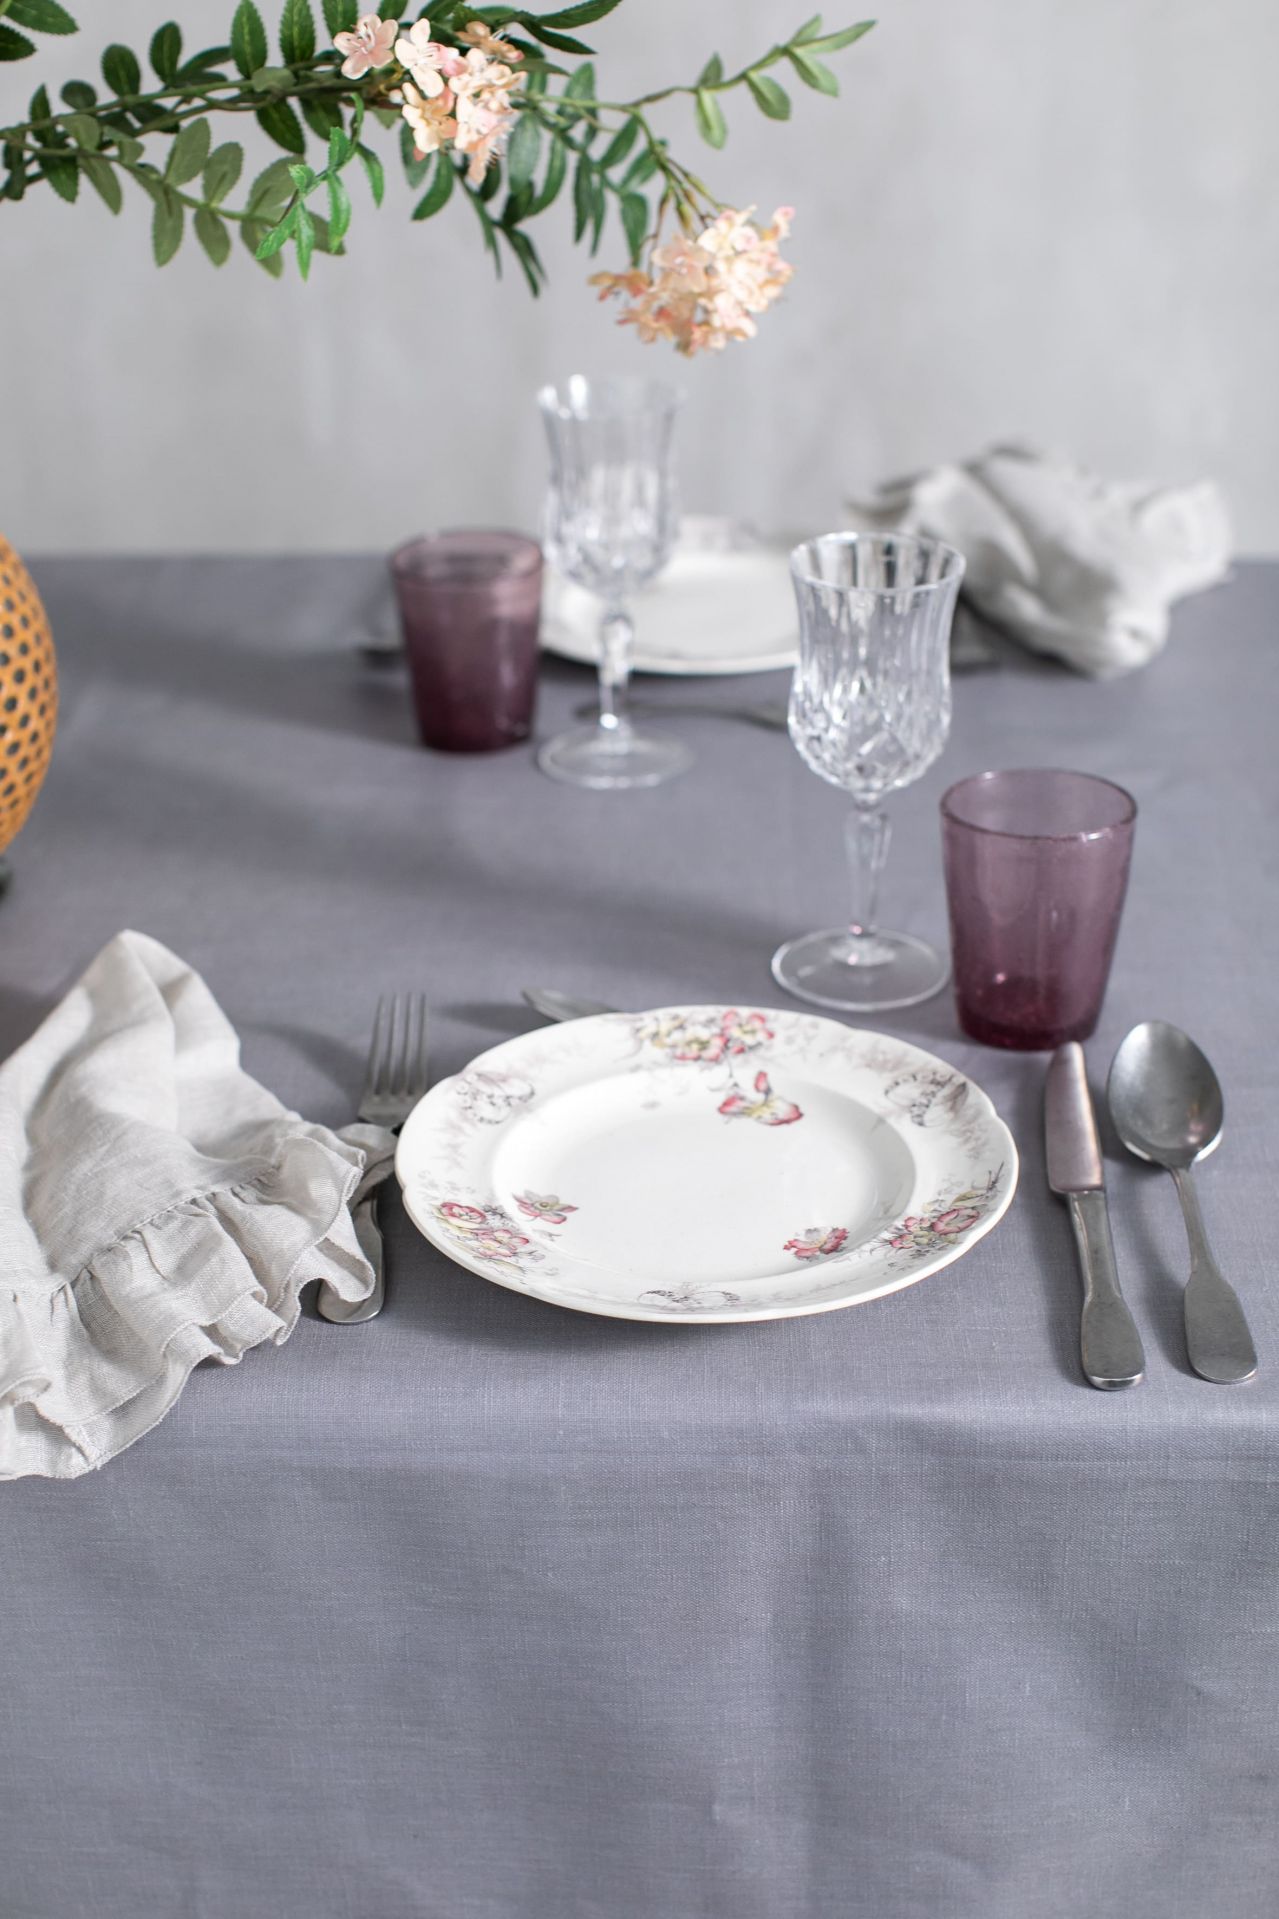 Stainproof Linen Tablecloth Filo